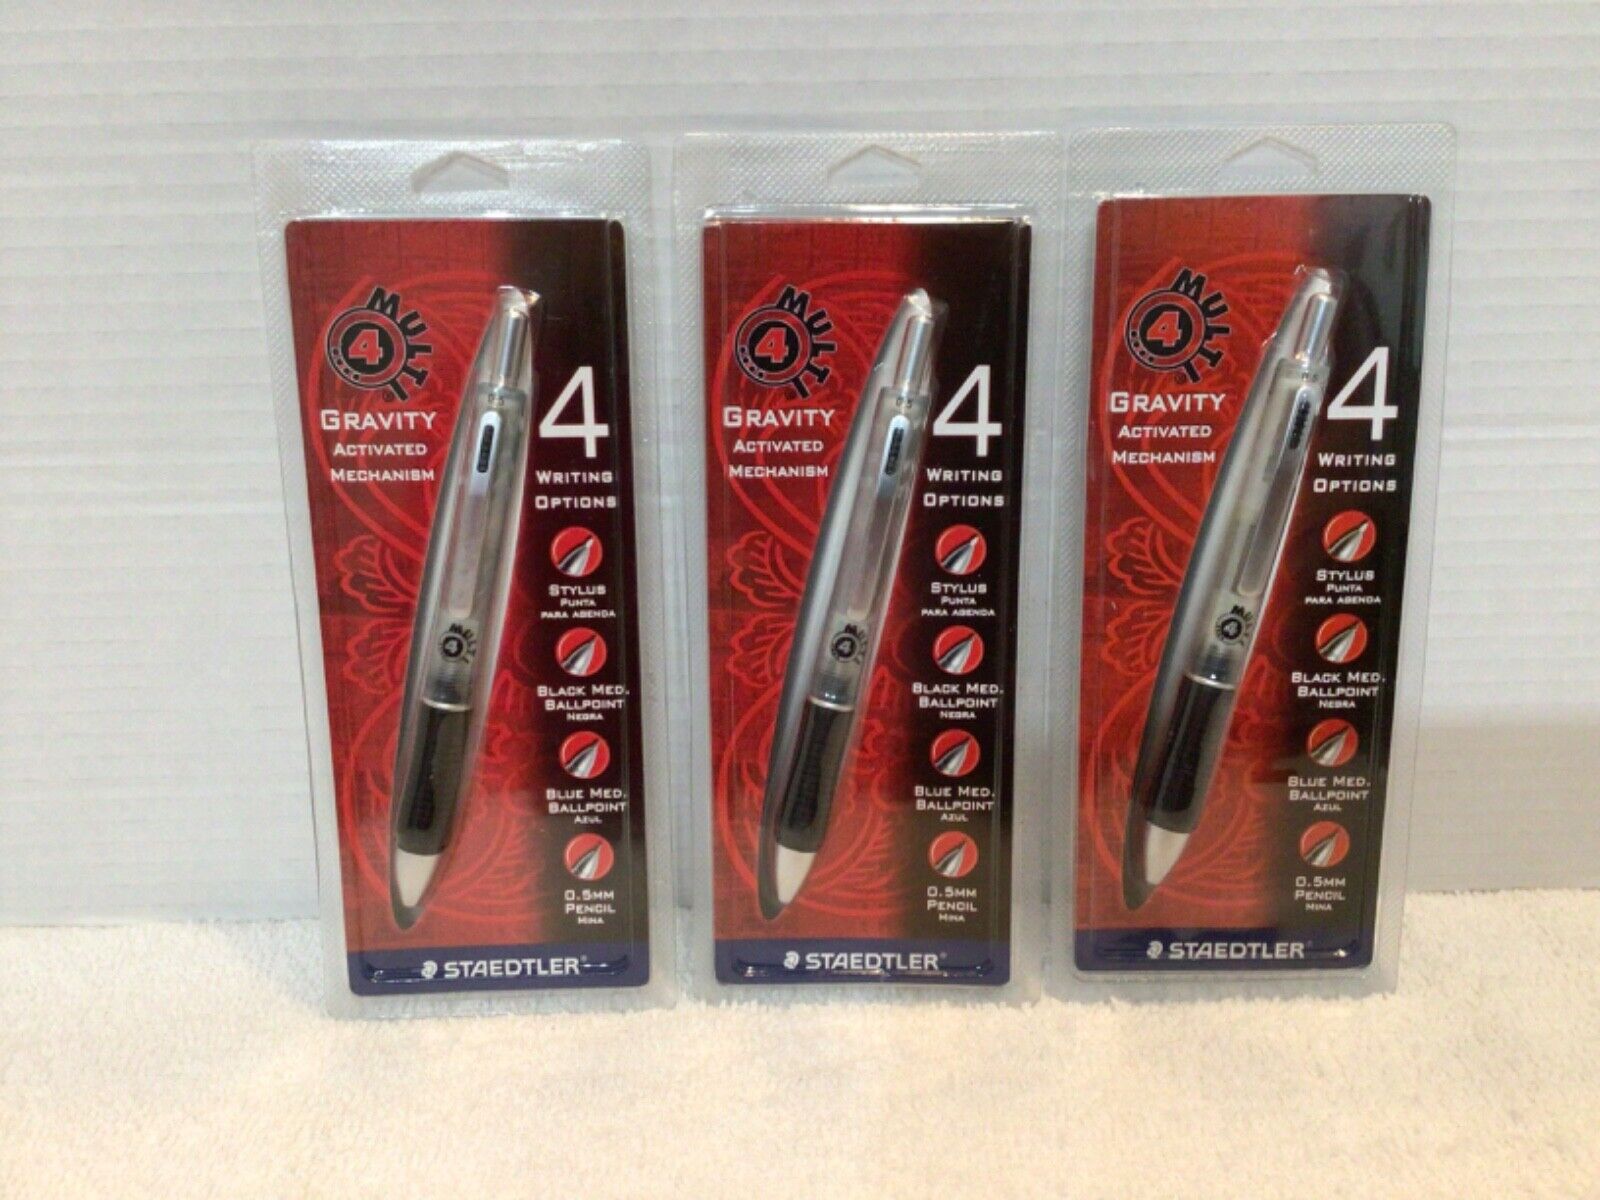 Staedtler Multi 4 Gravity Activated Mechanism Sytlus Ballpoint Pencil Lot of 3